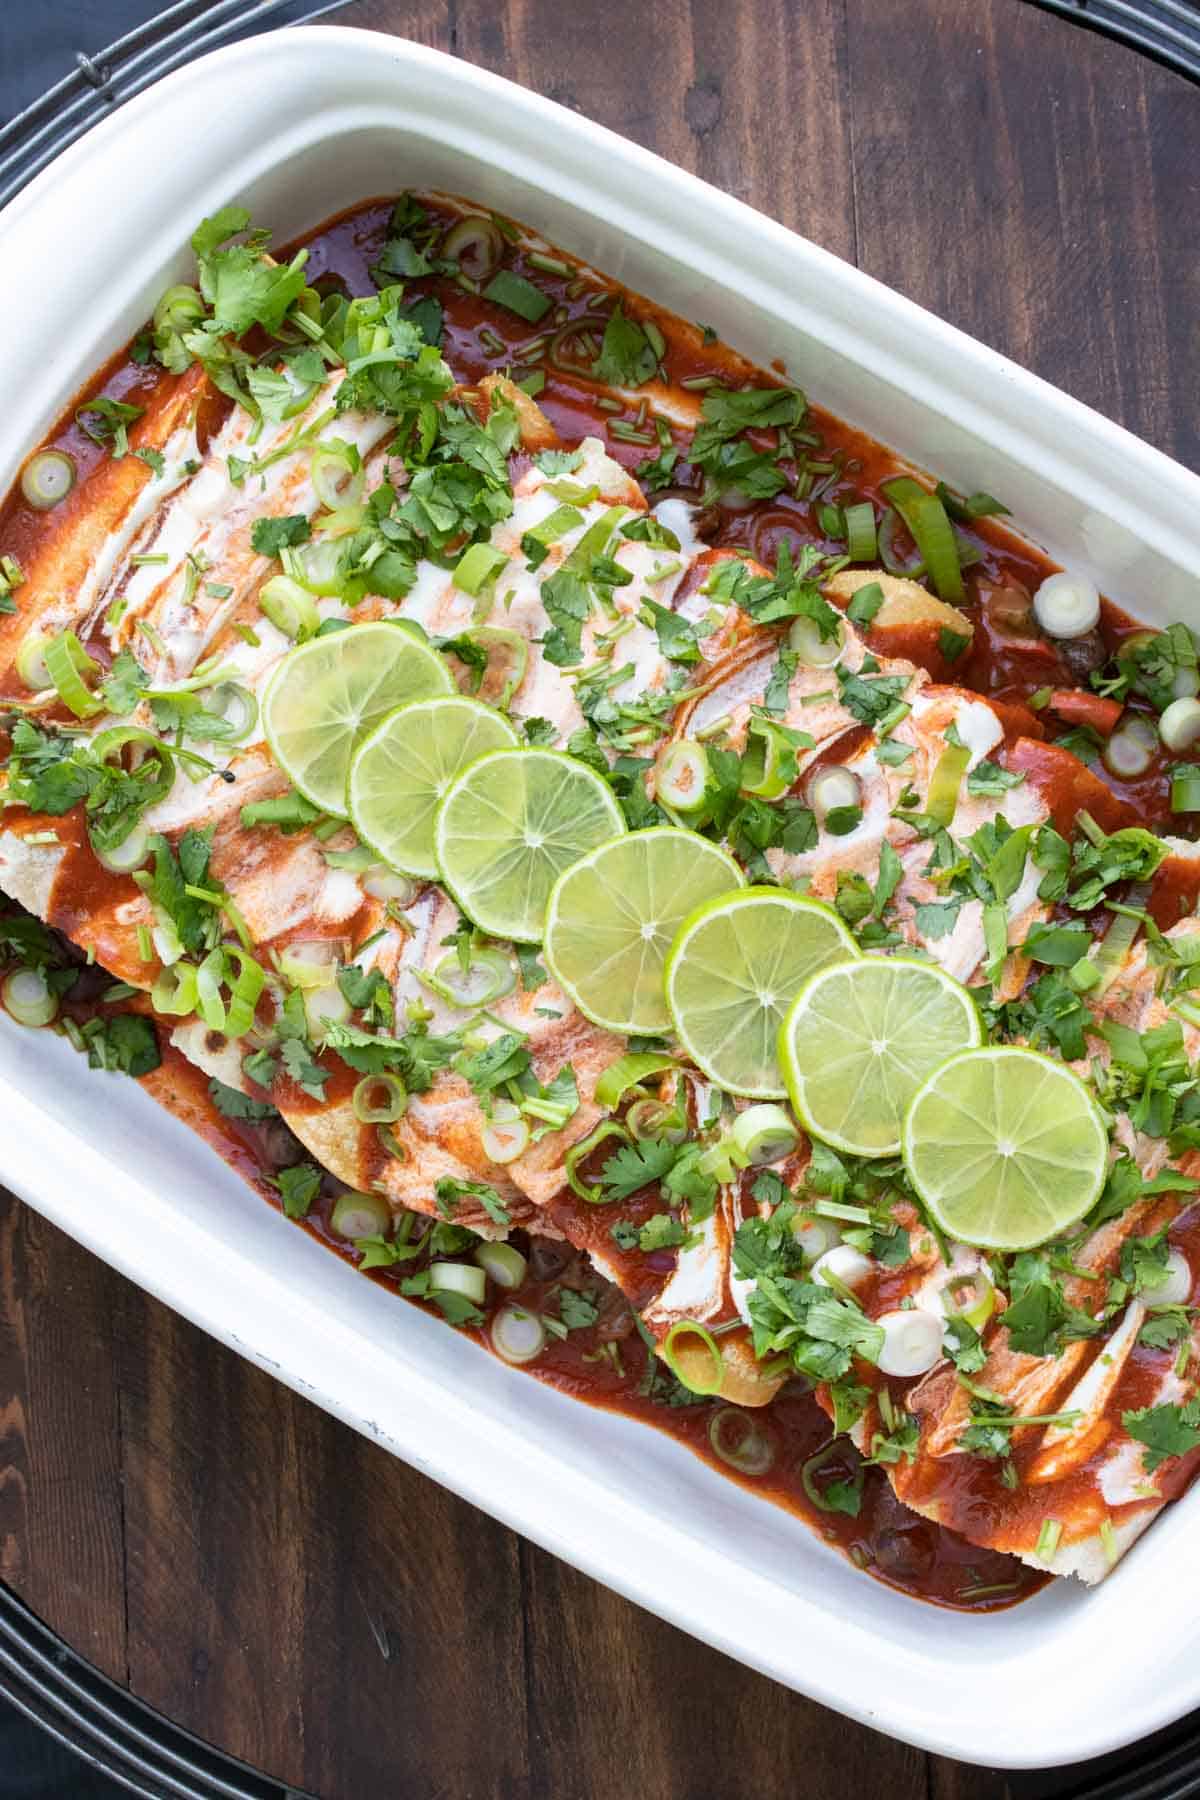 Uncooked enchiladas with red and white sauce, green onions and sliced limes.